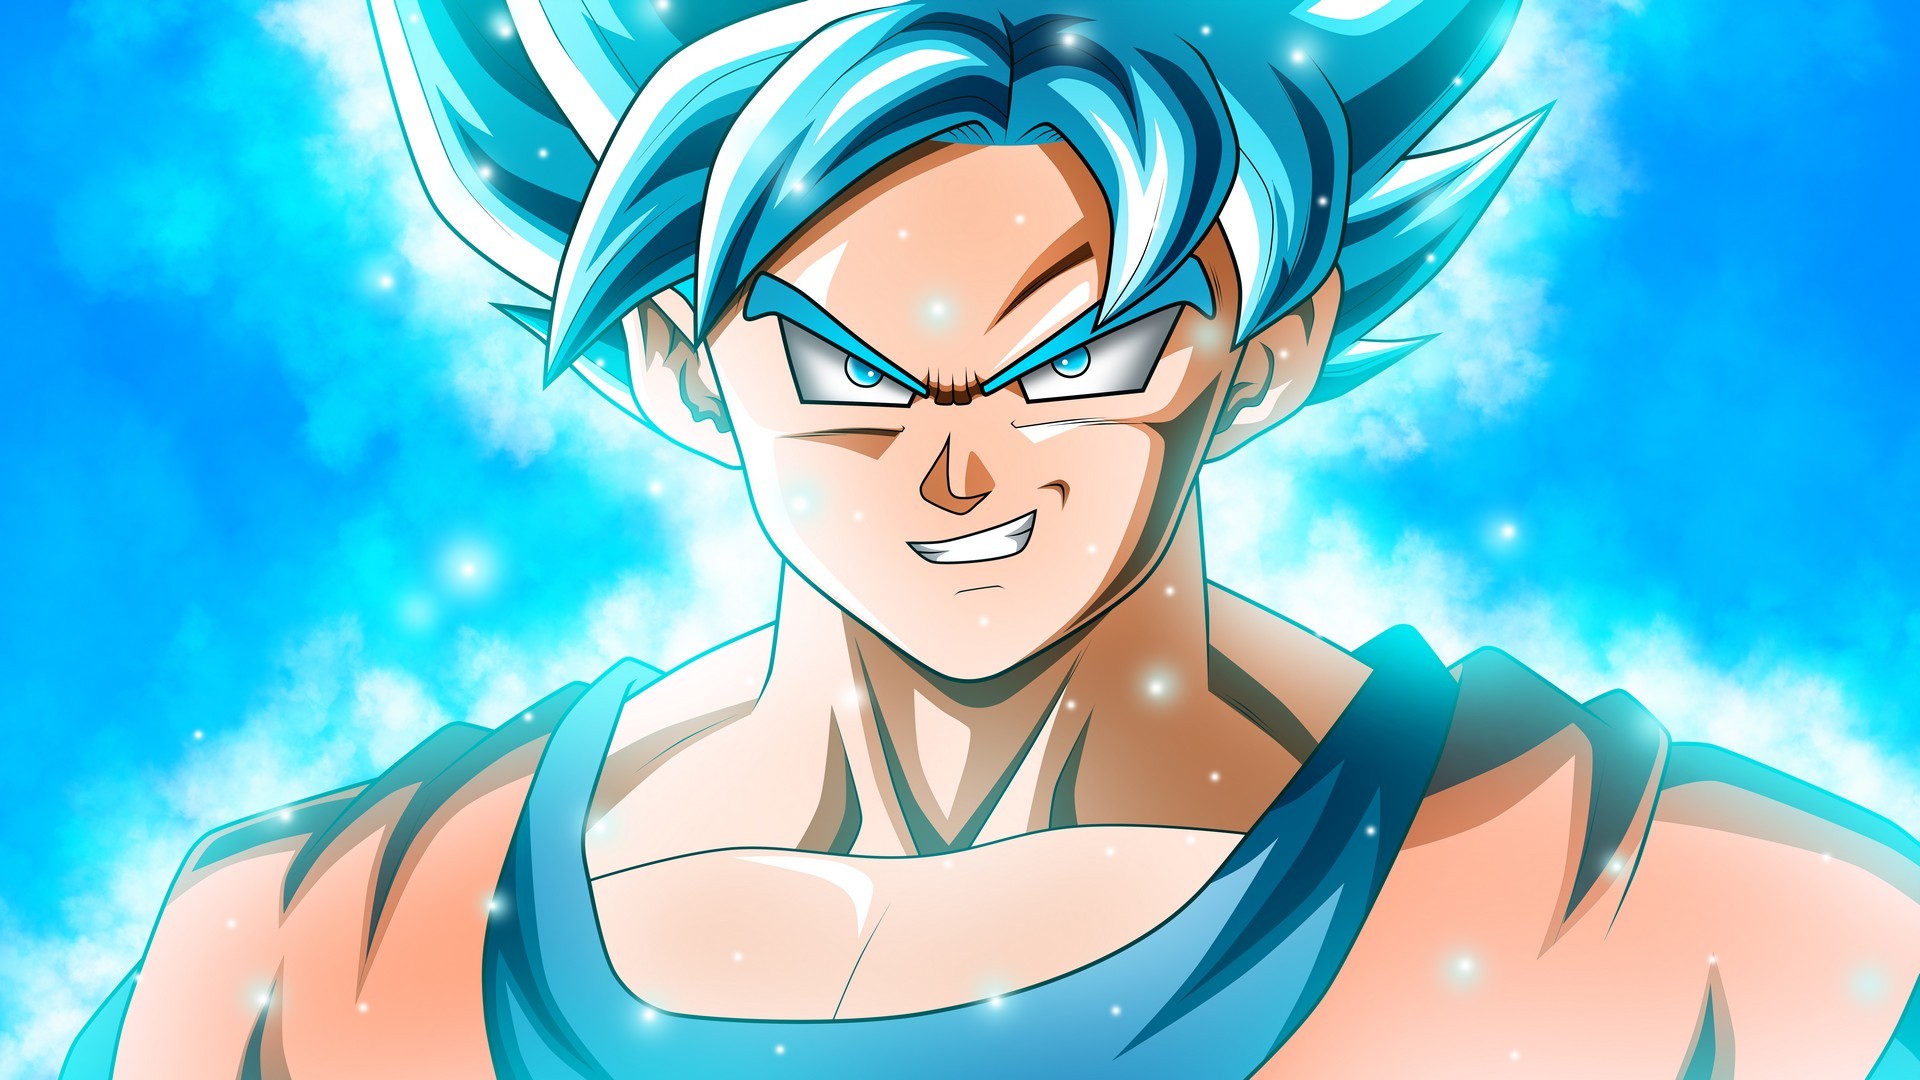 Goku SSJ Blue Background Wallpaper HD with image resolution 1920x1080 pixel. You can make this wallpaper for your Desktop Computer Backgrounds, Mac Wallpapers, Android Lock screen or iPhone Screensavers